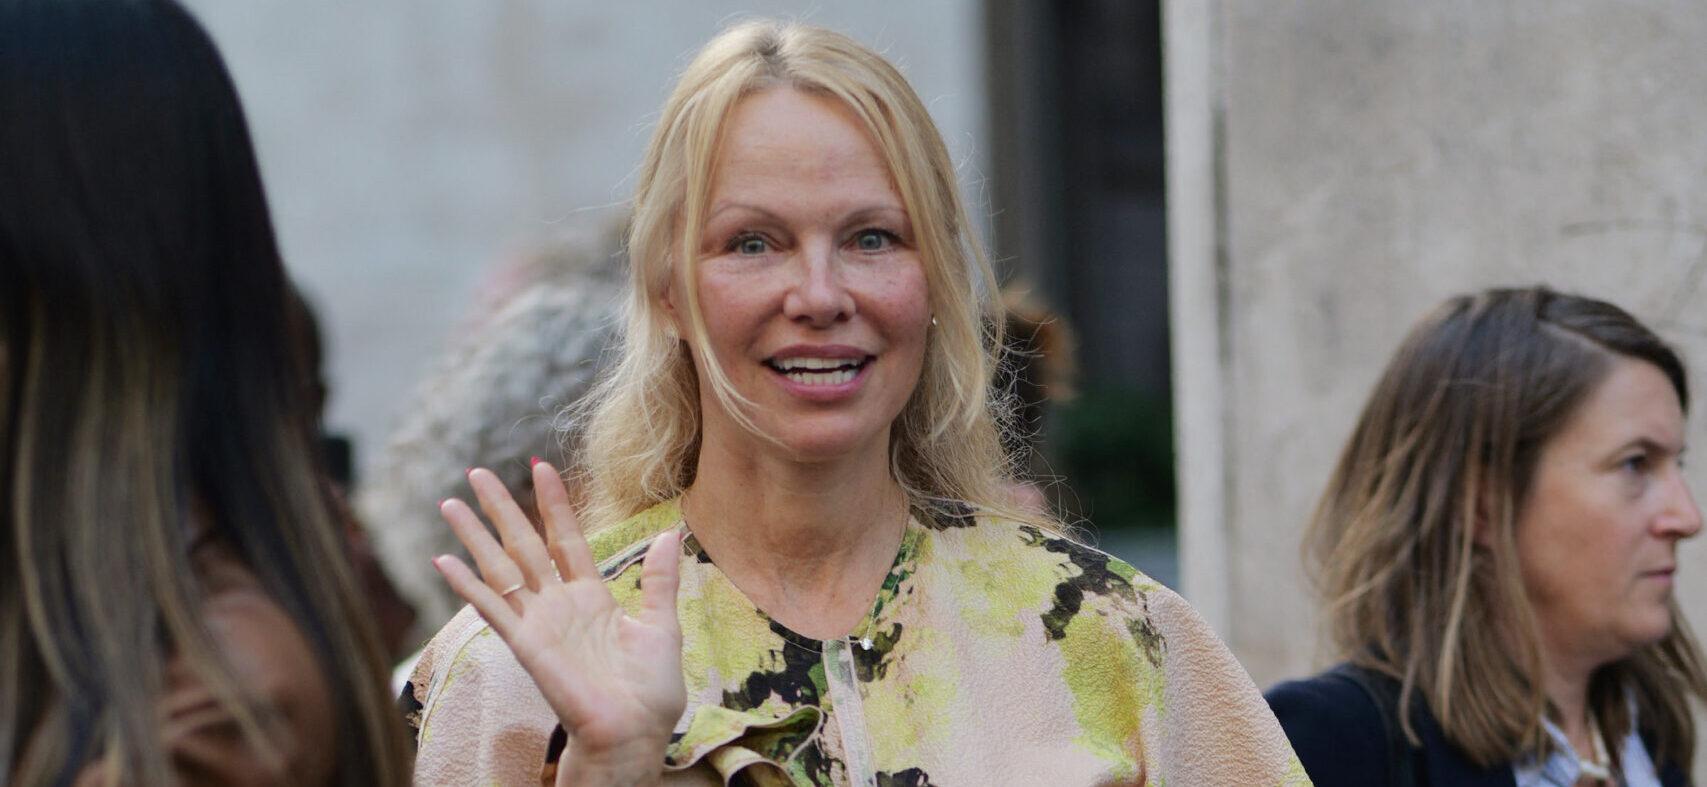 The Sad Reason Behind Pamela Anderson’s Decision To Stop Wearing Makeup